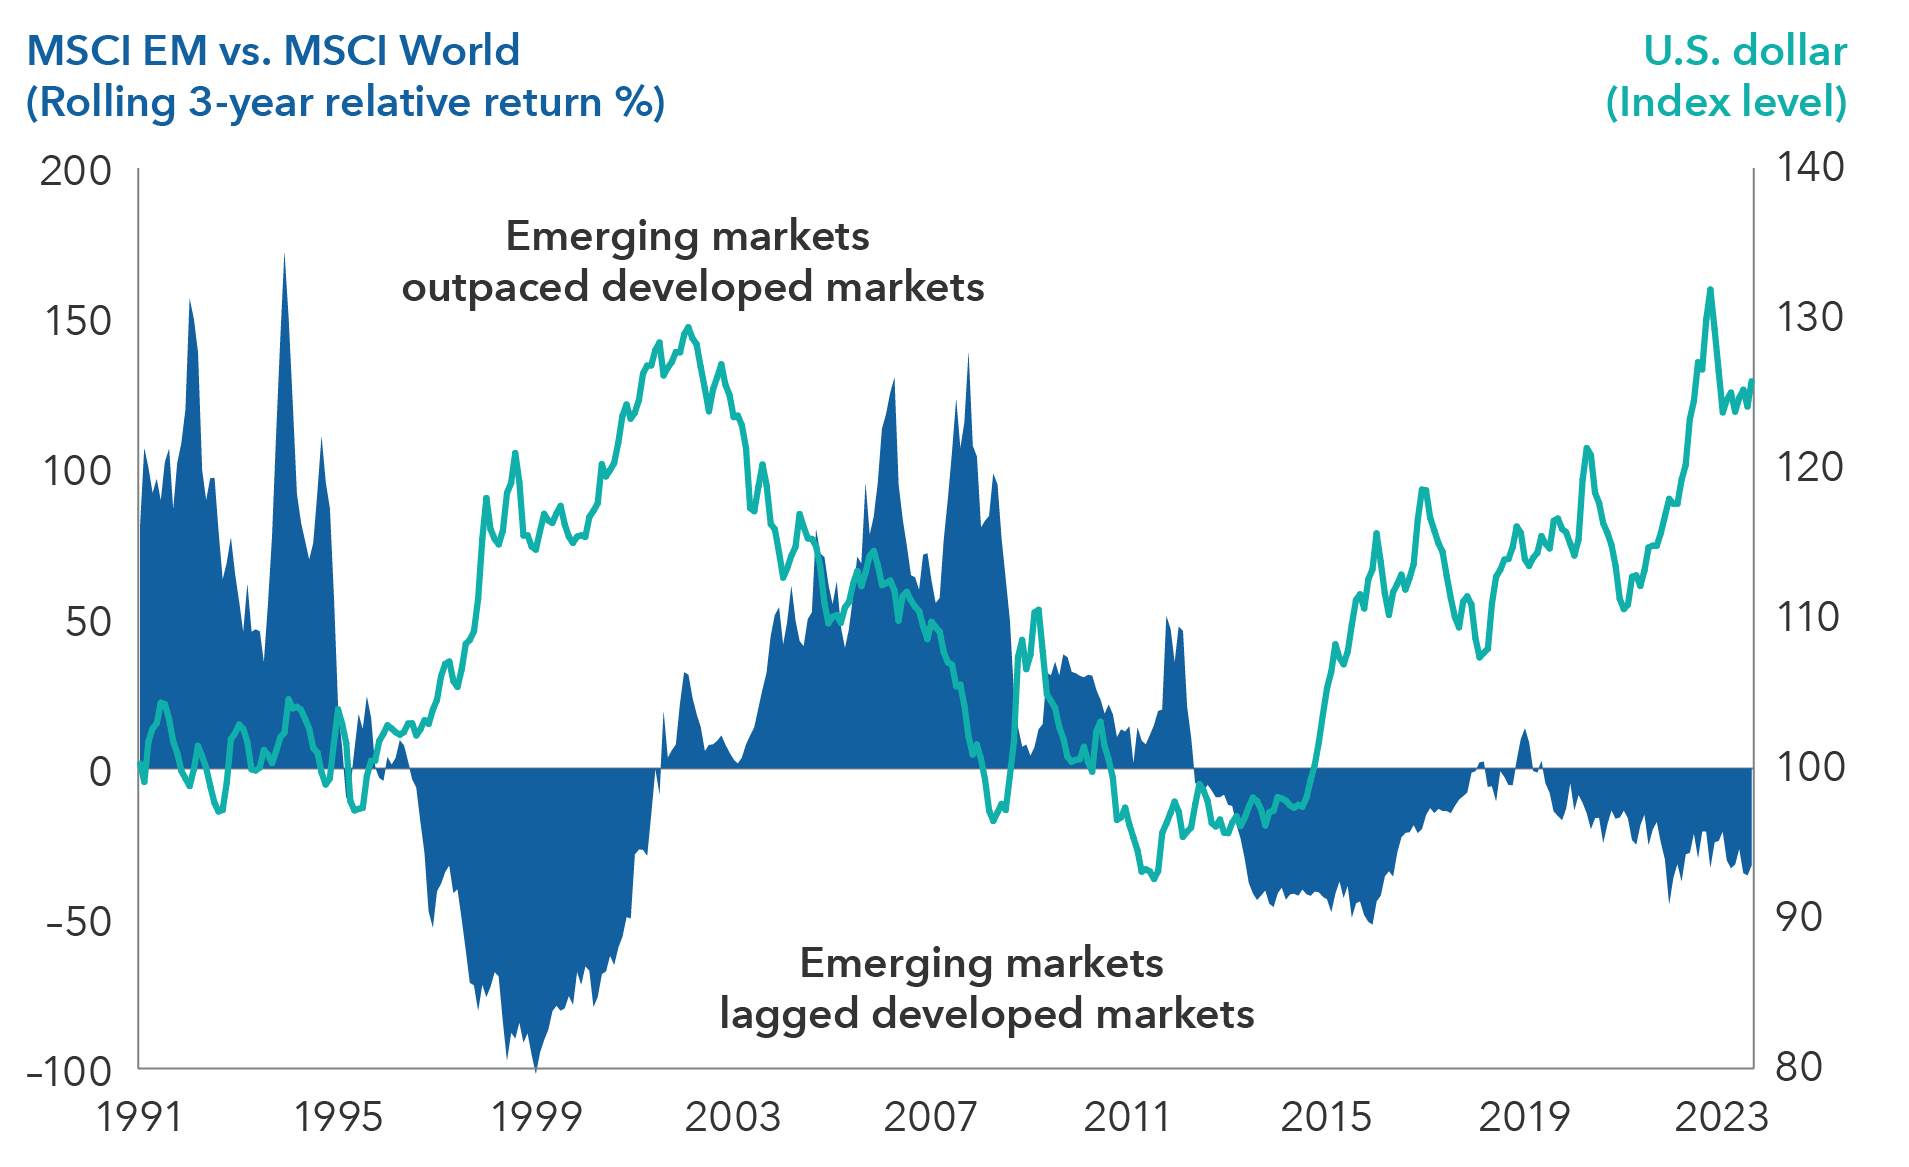 Chart shows relative performance of MSCI Emerging Markets Index versus the MSCI World Index from January 31, 1991, to August 31, 2023. Emerging markets outperformed developed markets from 1991 to June 1996. Developed markets outperformed emerging markets from July 1996 to May 2001, a period when the dollar generally strengthened. Emerging markets then outperformed developed markets until April 2012, a period when the dollar generally weakened. Developed markets have outperformed emerging markets since, a period when the dollar generally strengthened.